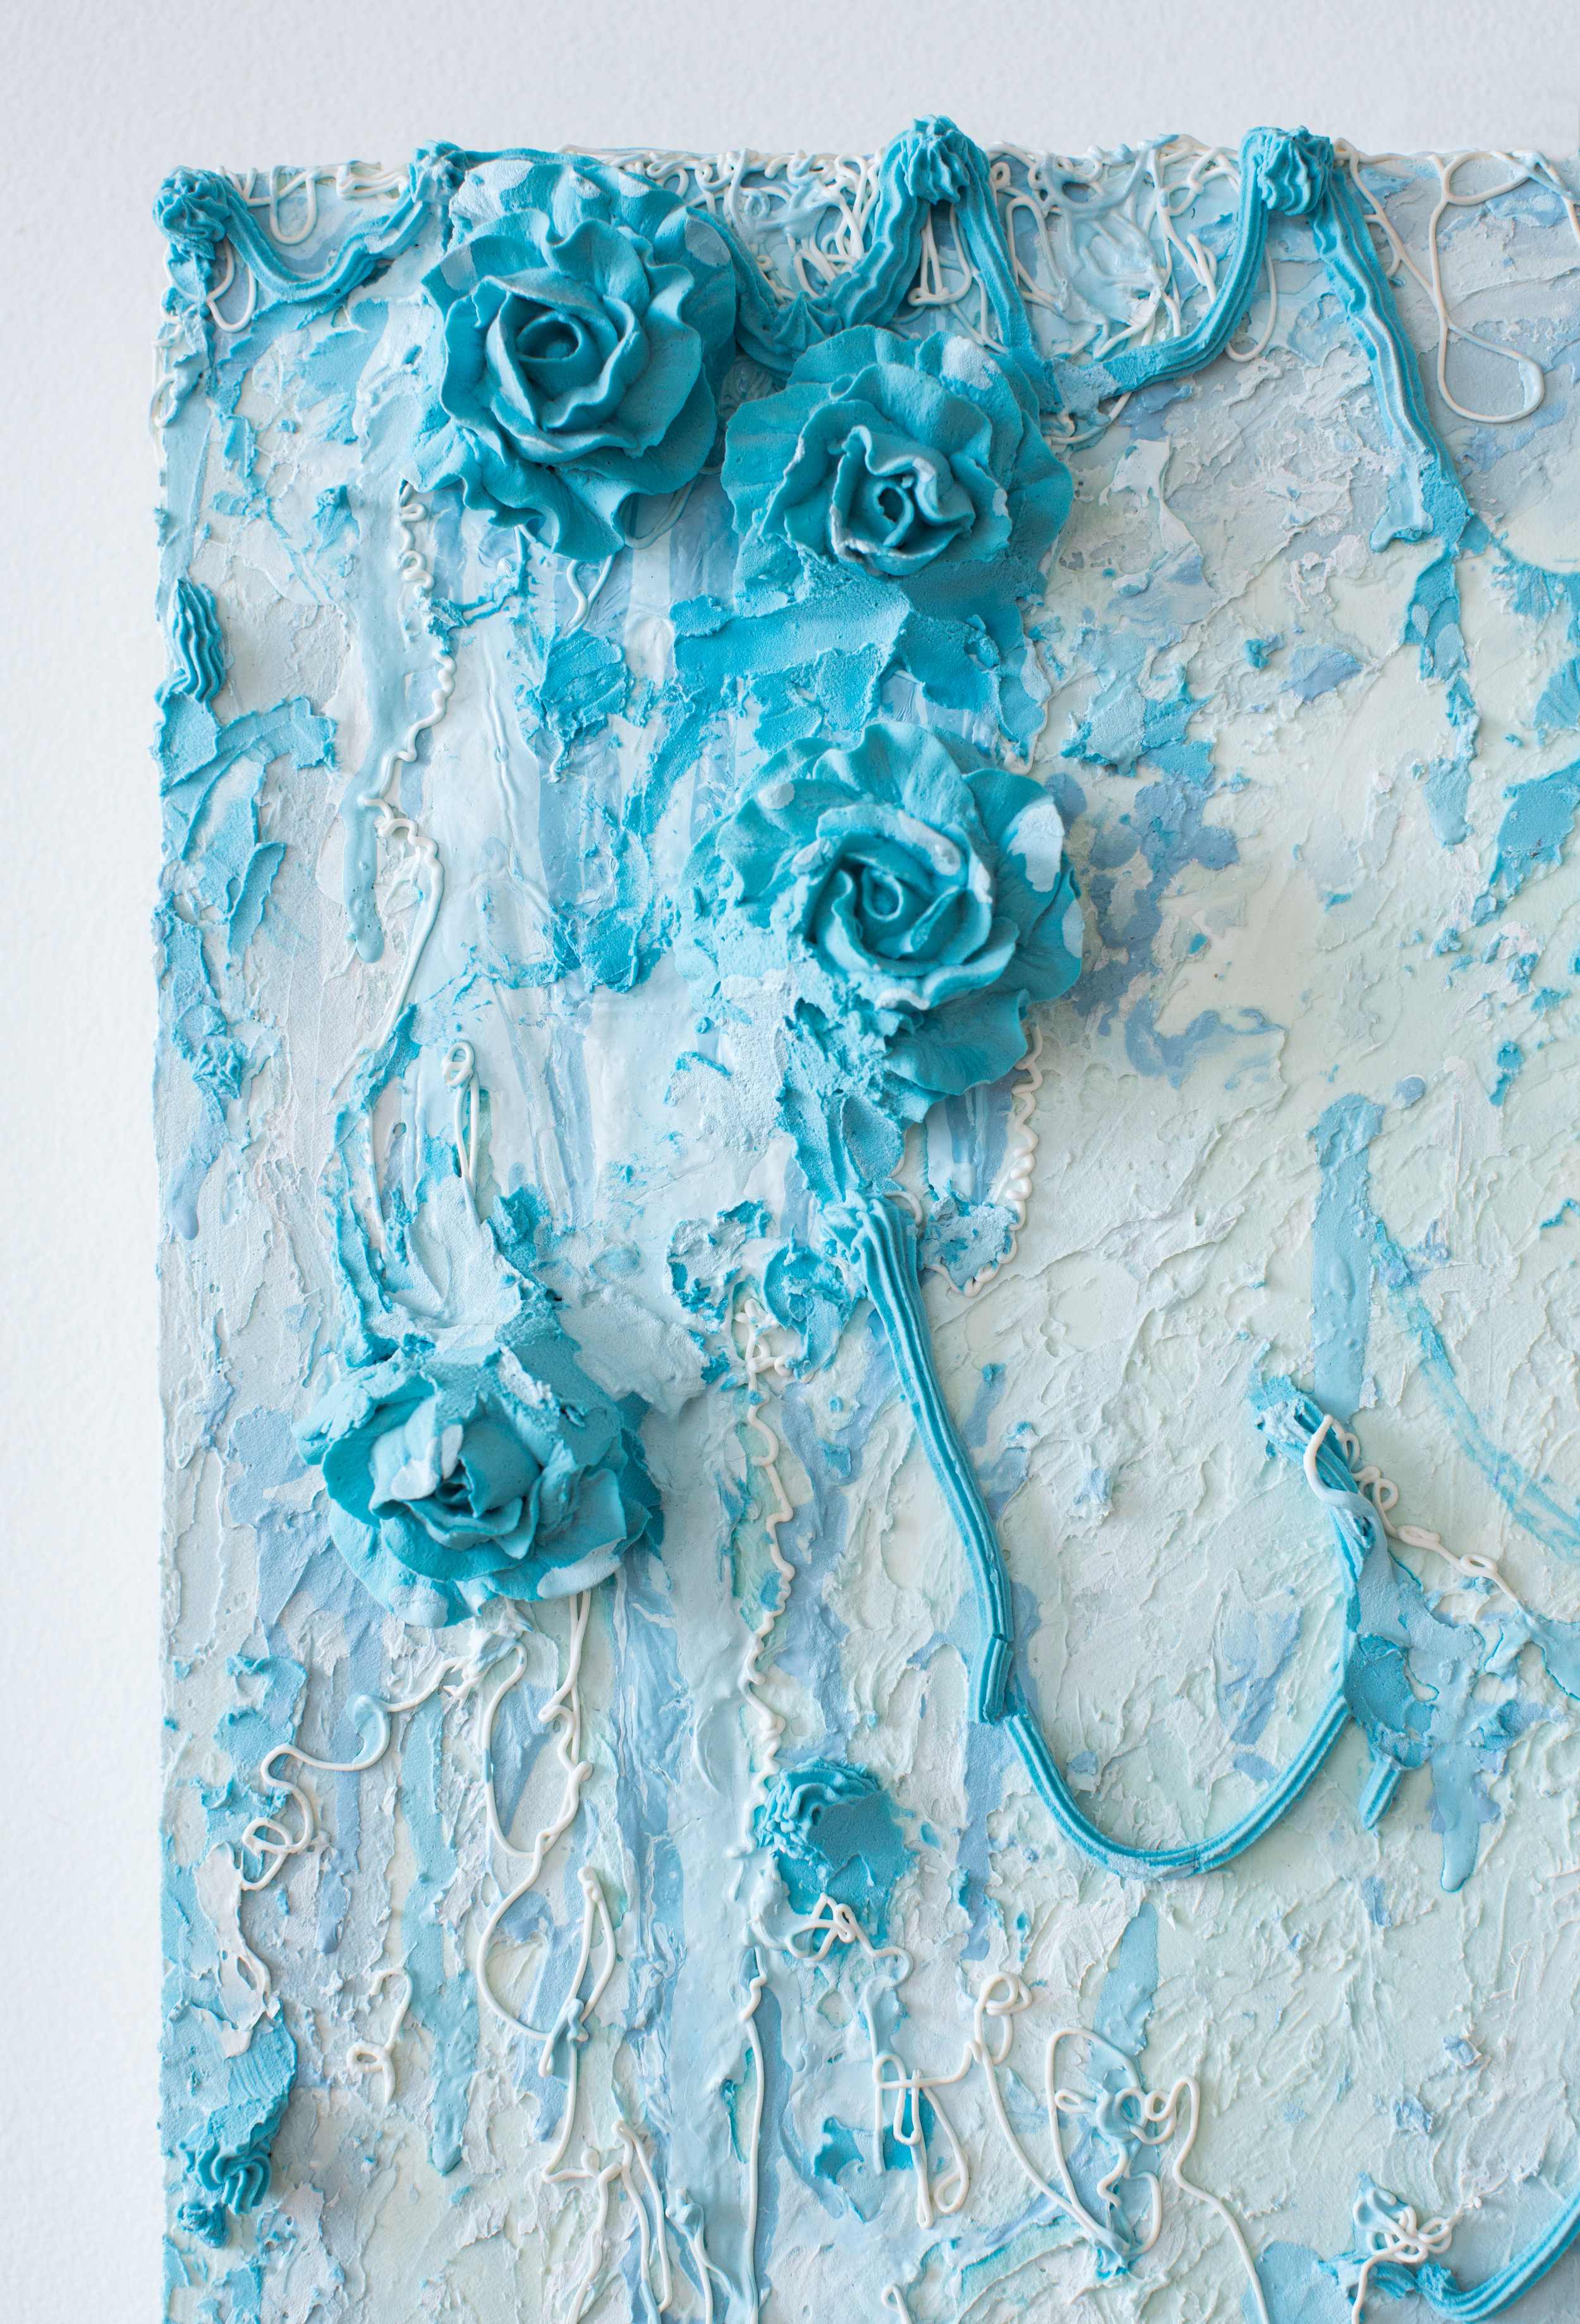   Blue Experiment No. 1 (Detail)   Mixed Media on Board  2013  Photo:  Julie Dietz Photography  